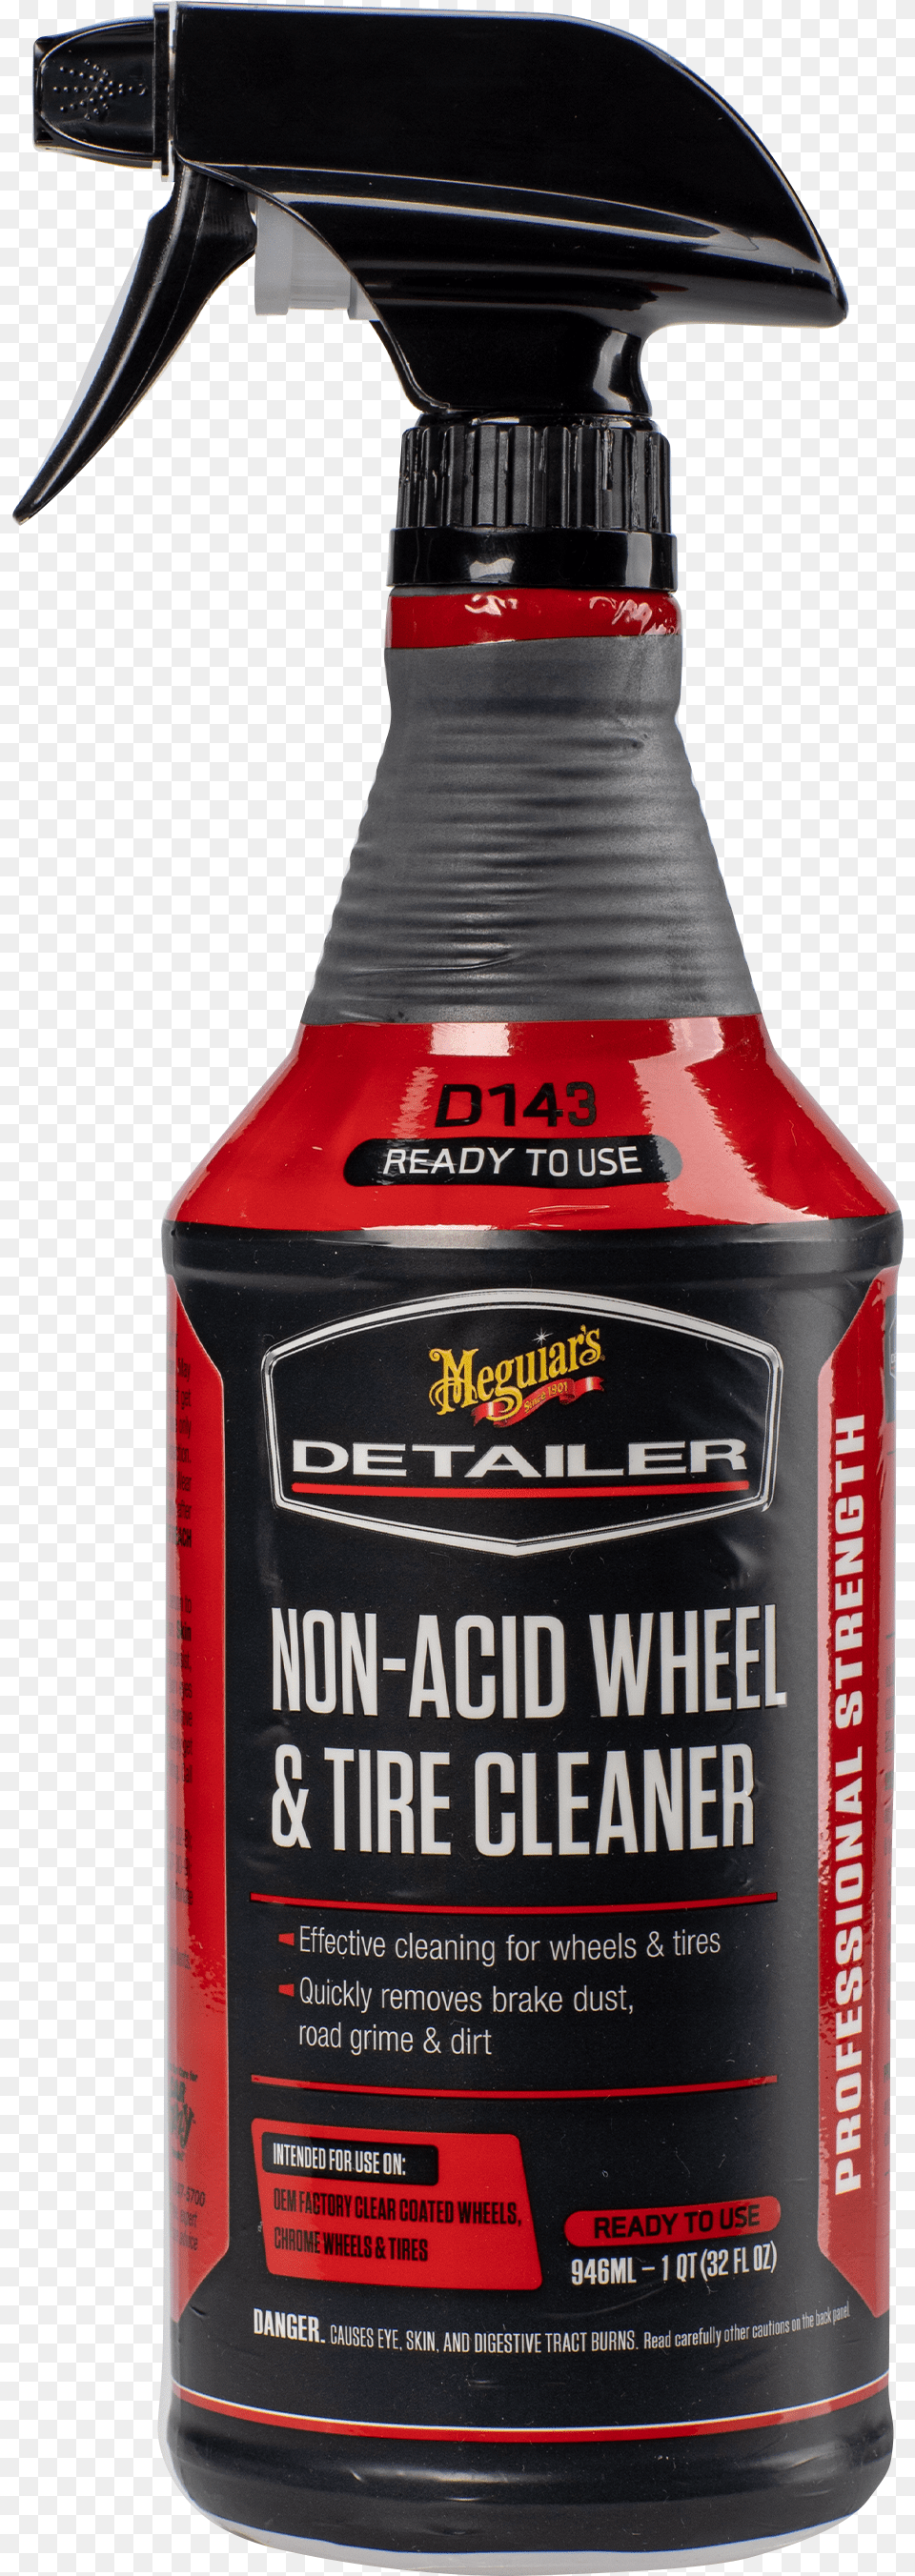 Meguiars Non Acid Wheel Amp Tire Cleaner Clean Tires Bottle, Tin, Can, Spray Can, Food Free Png